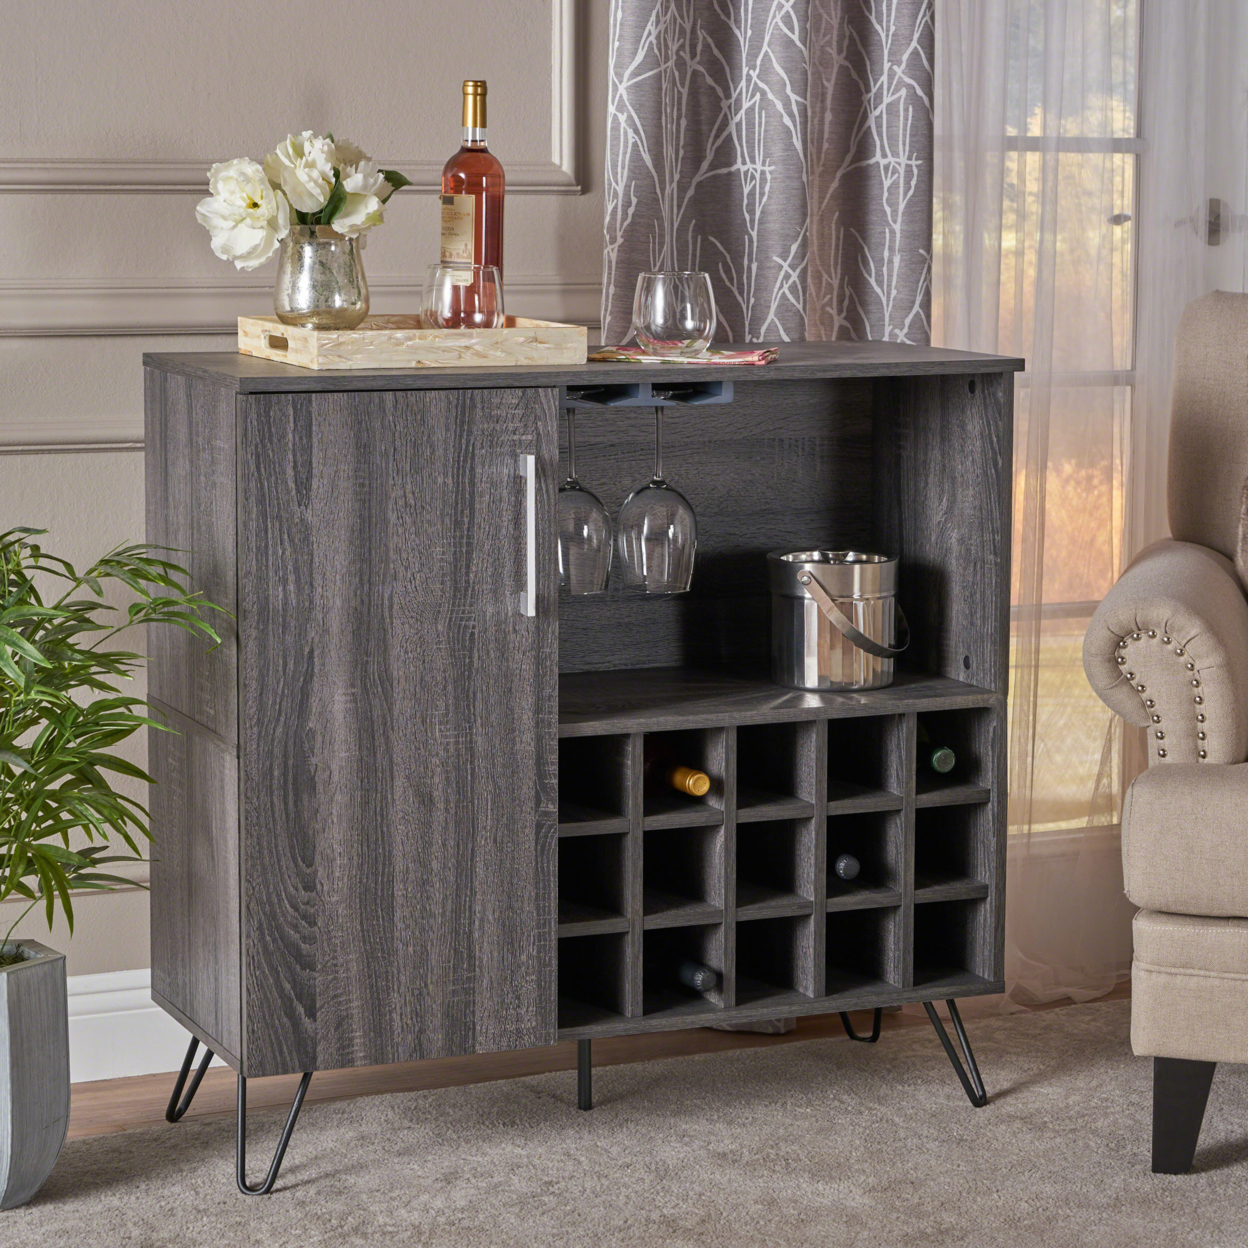 Lochner Mid Century Sonoma Finished Faux Wood Wine And Bar Cabinet - Sonoma Gray Oak